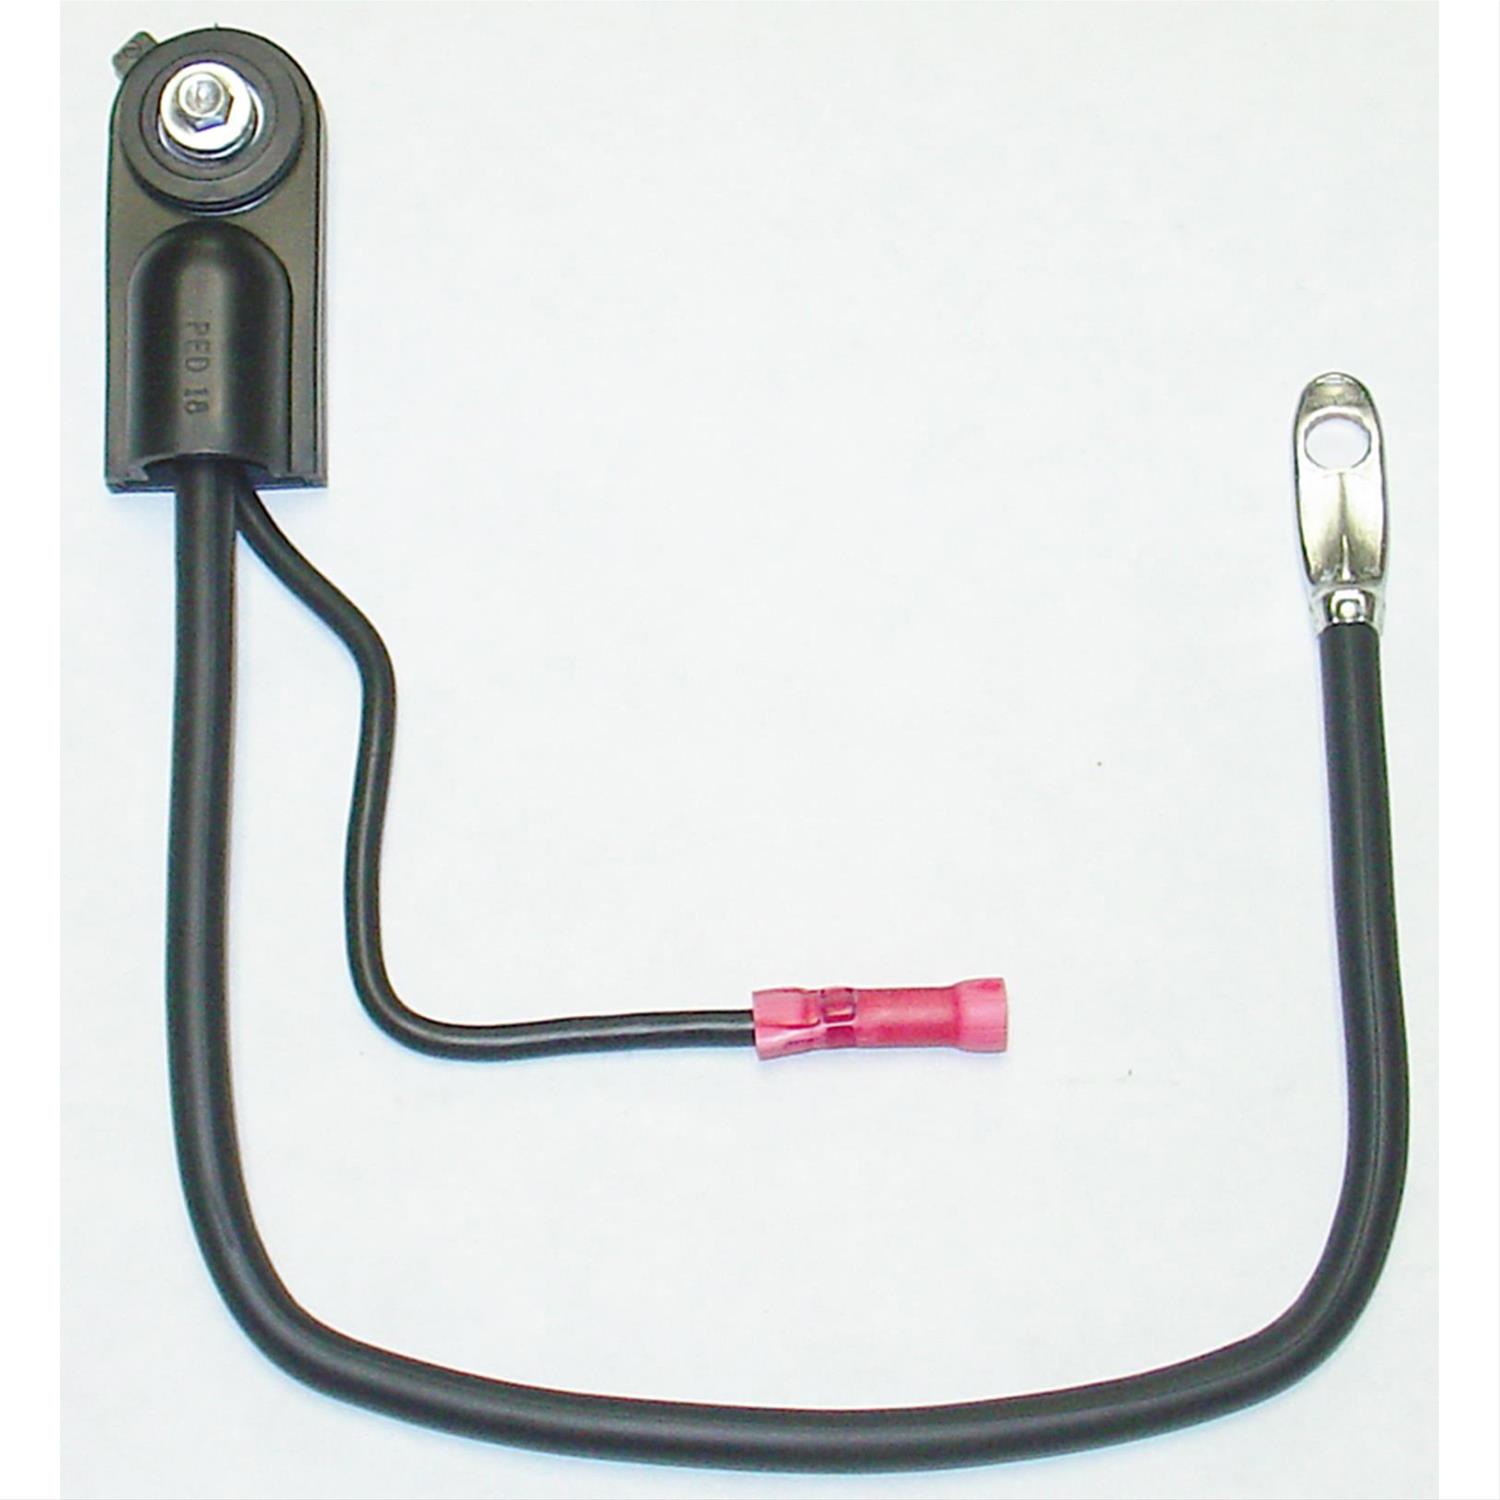 Battery cable. Battery with Cable Stiga, артикул: 118120010-0. Battery position.